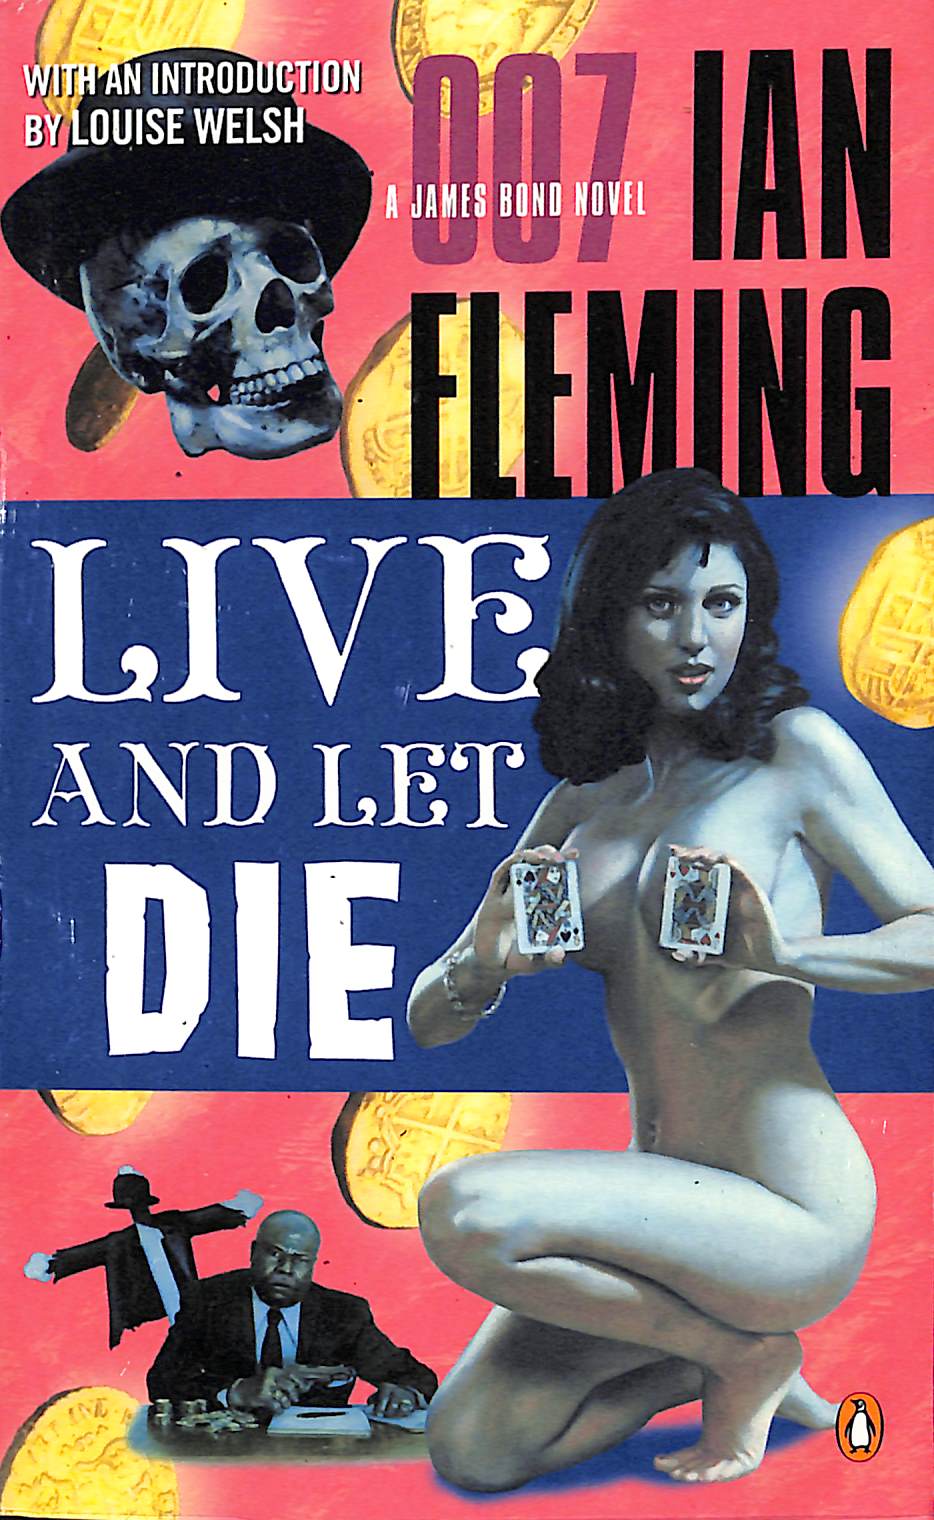 "Live And Let Die" 2006 FLEMING, Ian